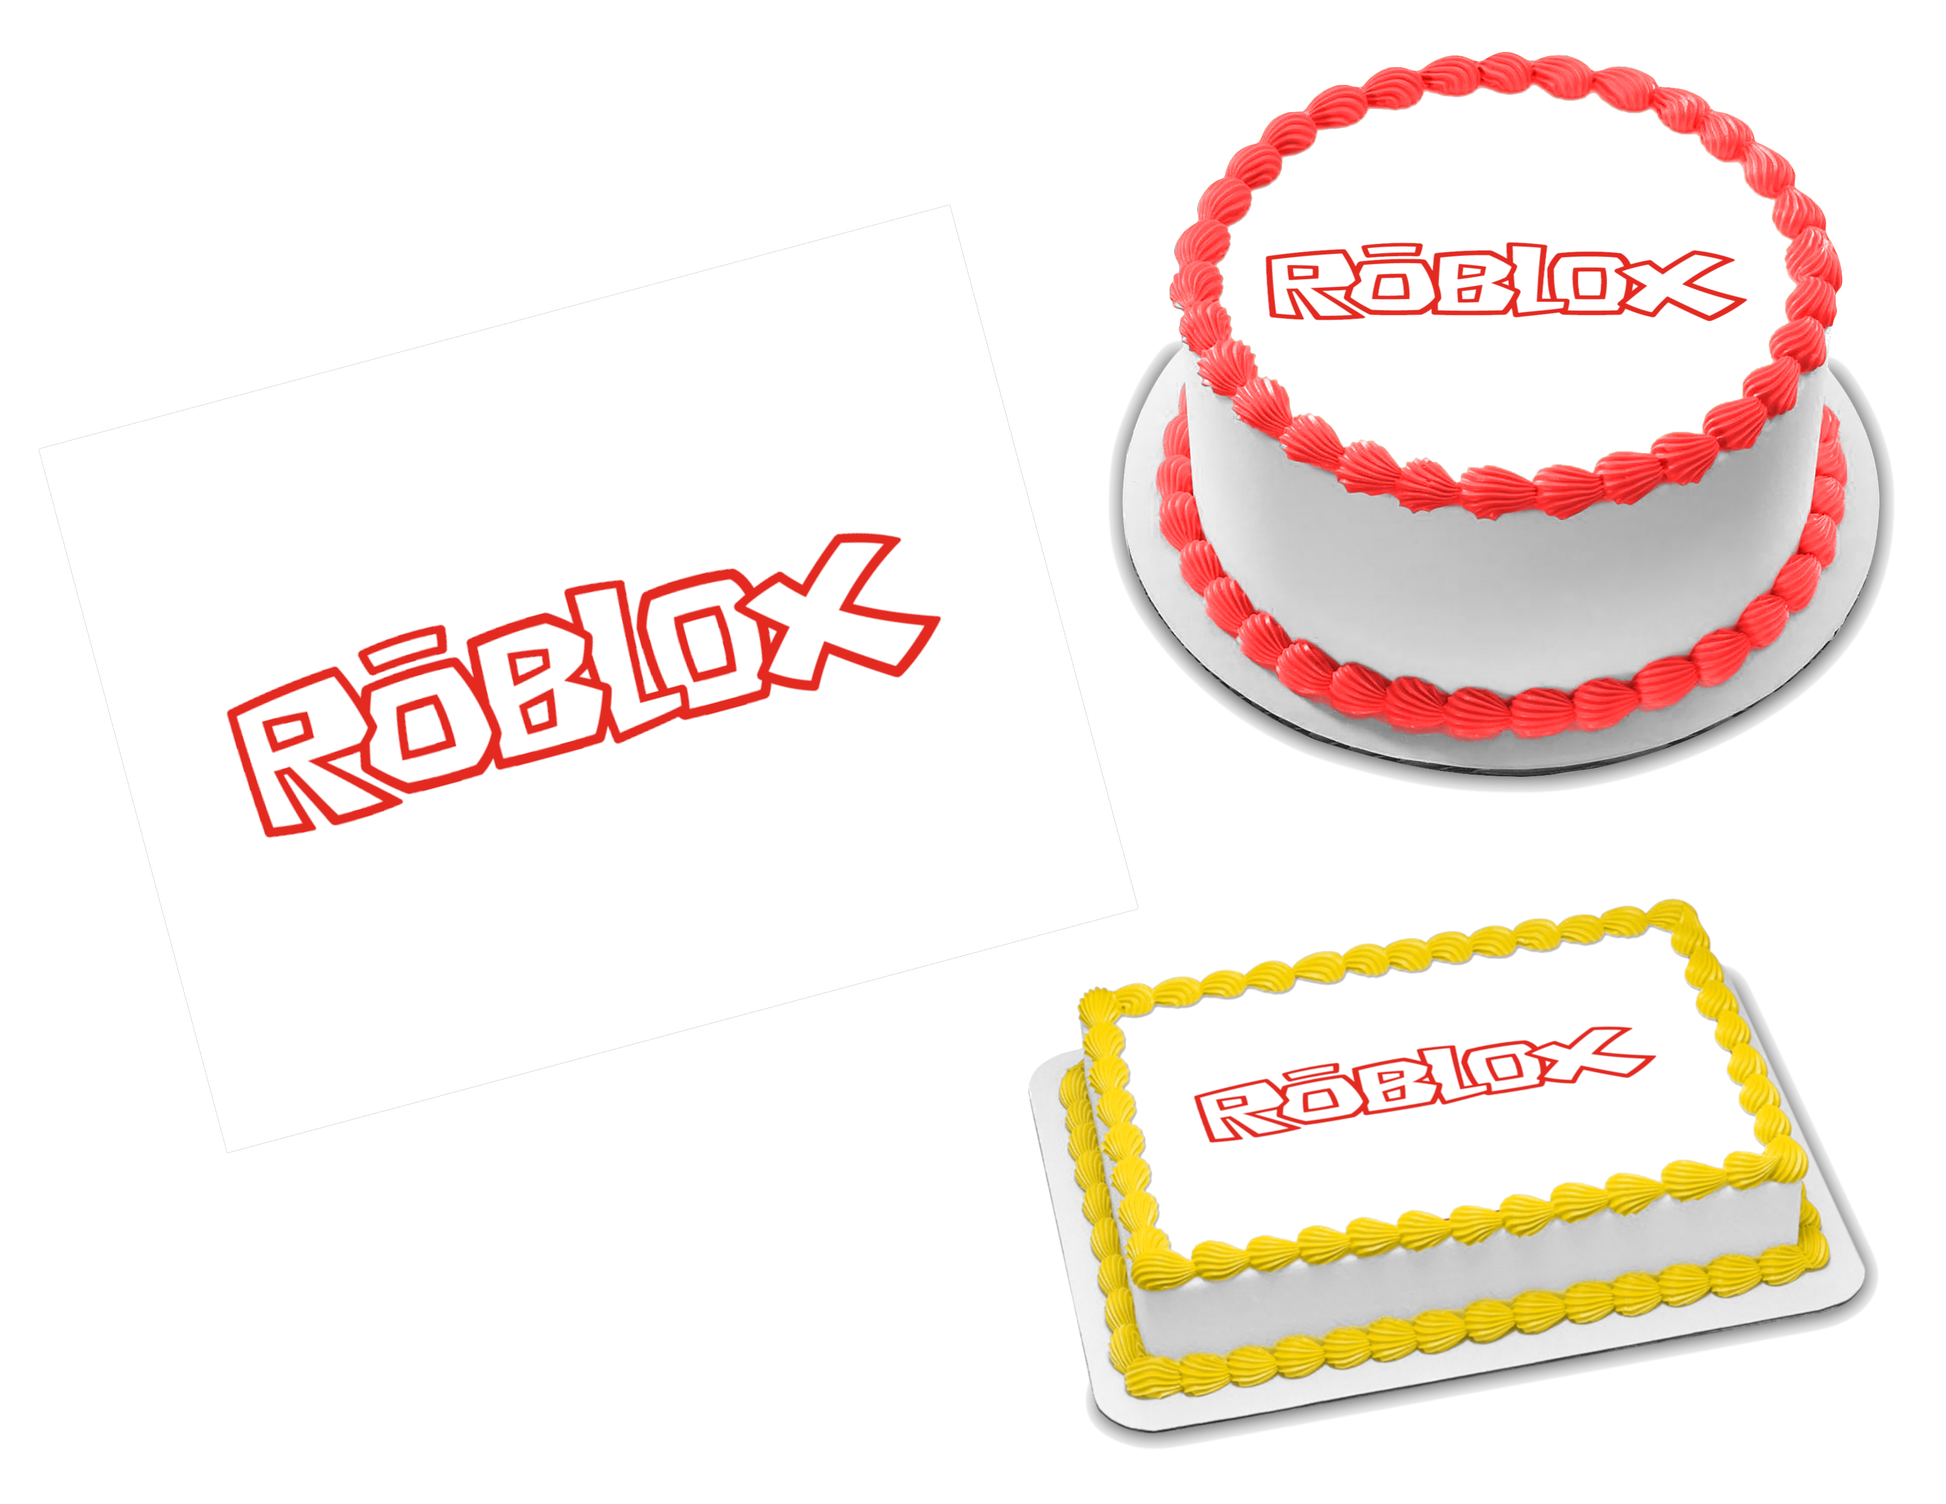 Express yourself with Roblox decals